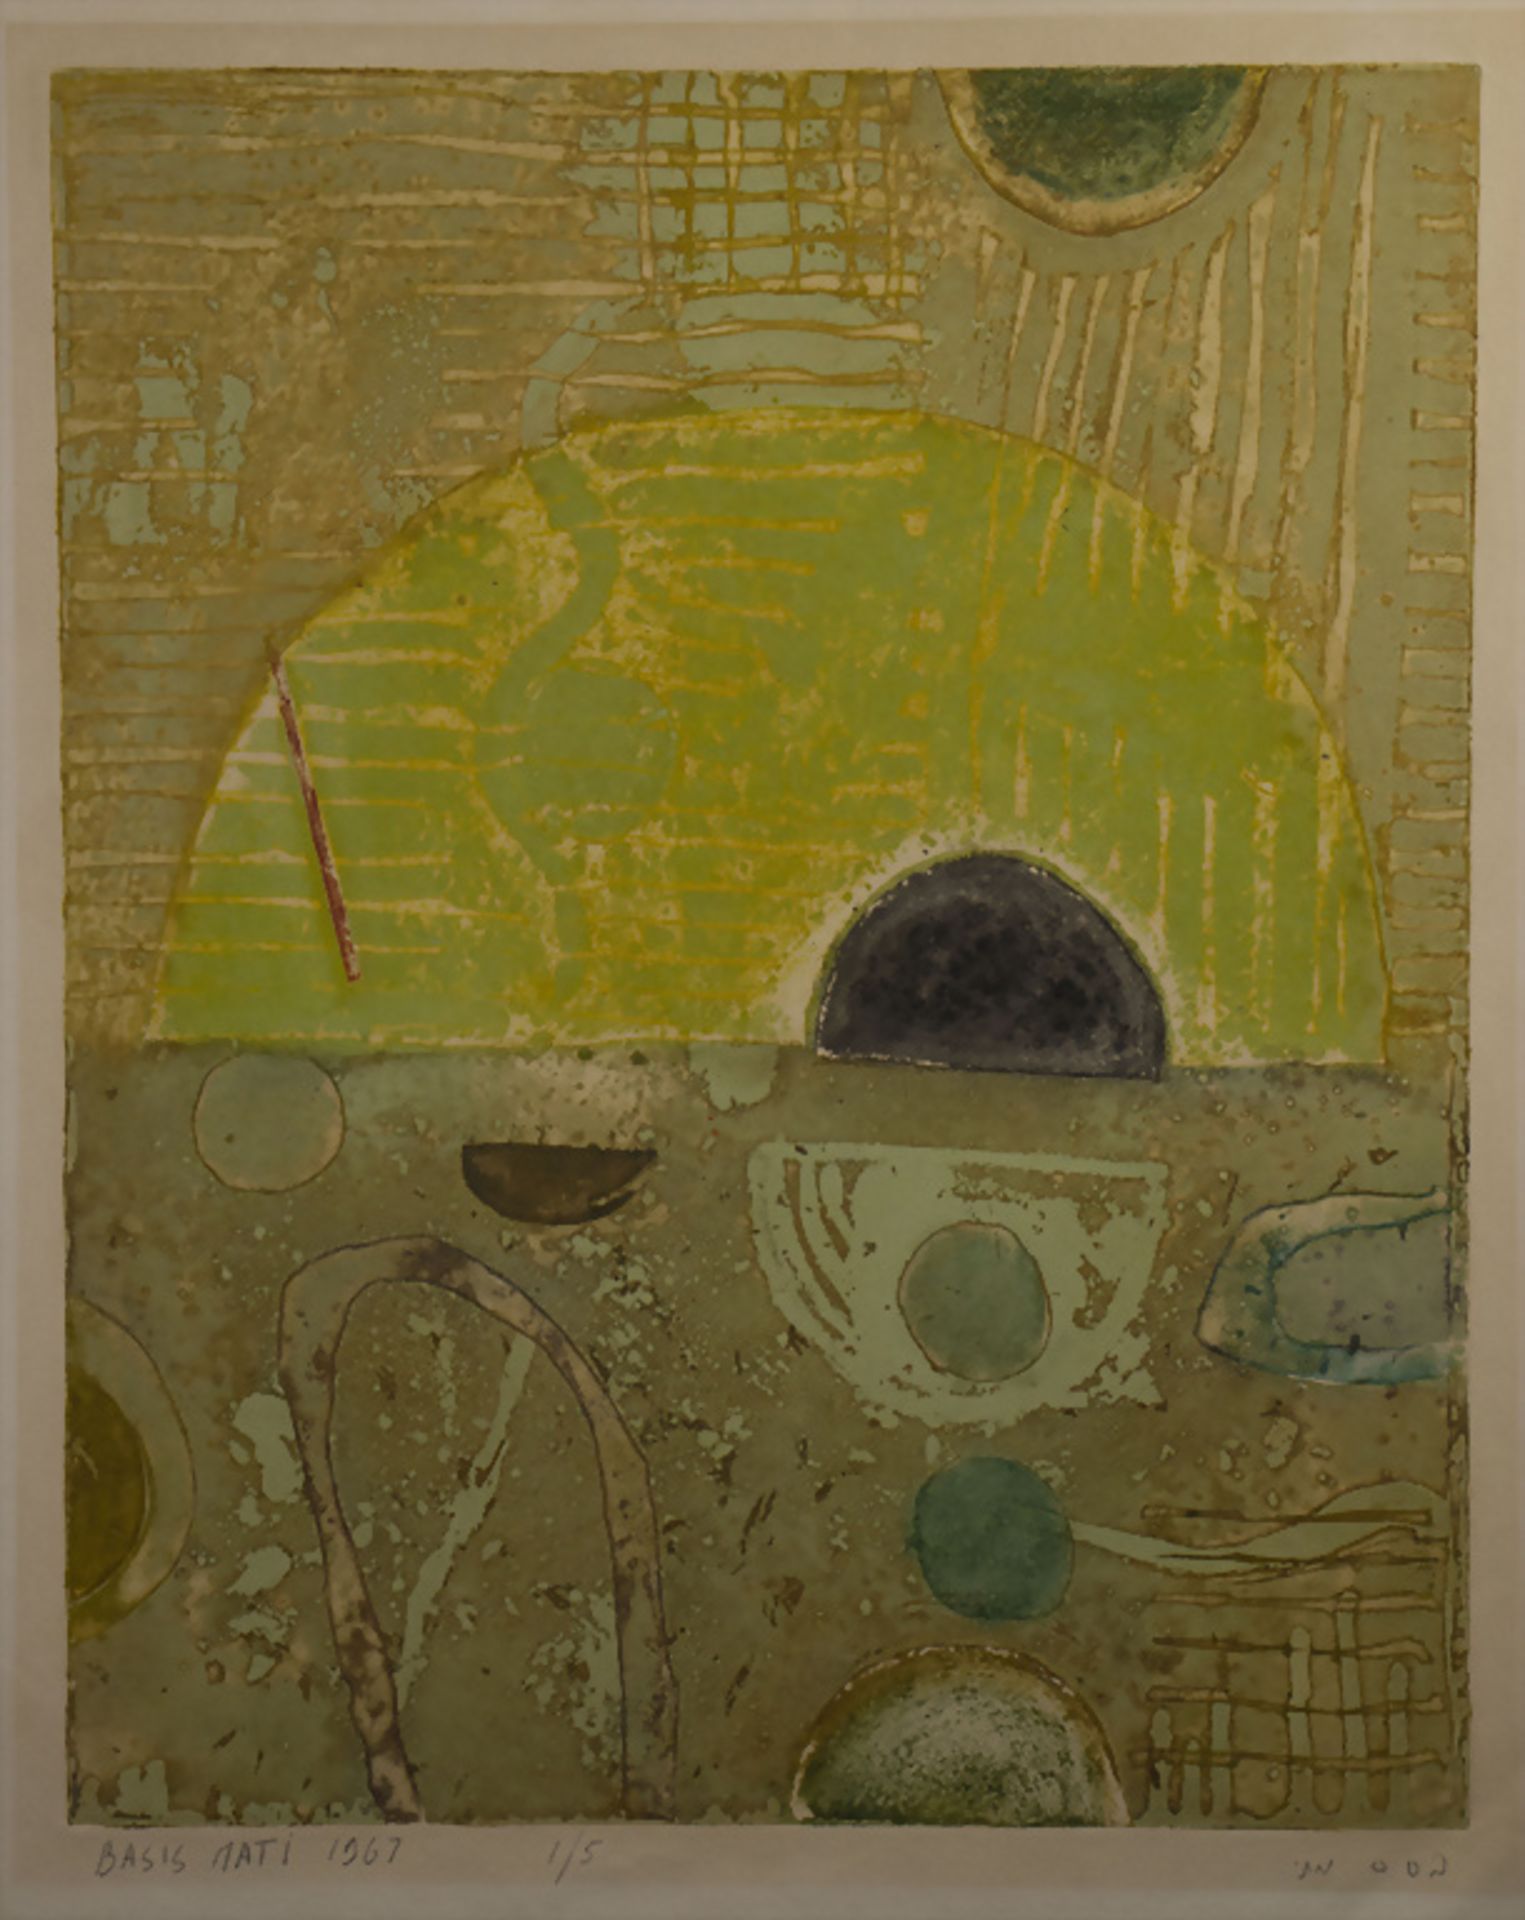 Mati BASIS (*1933), 'Composition in green', 1967